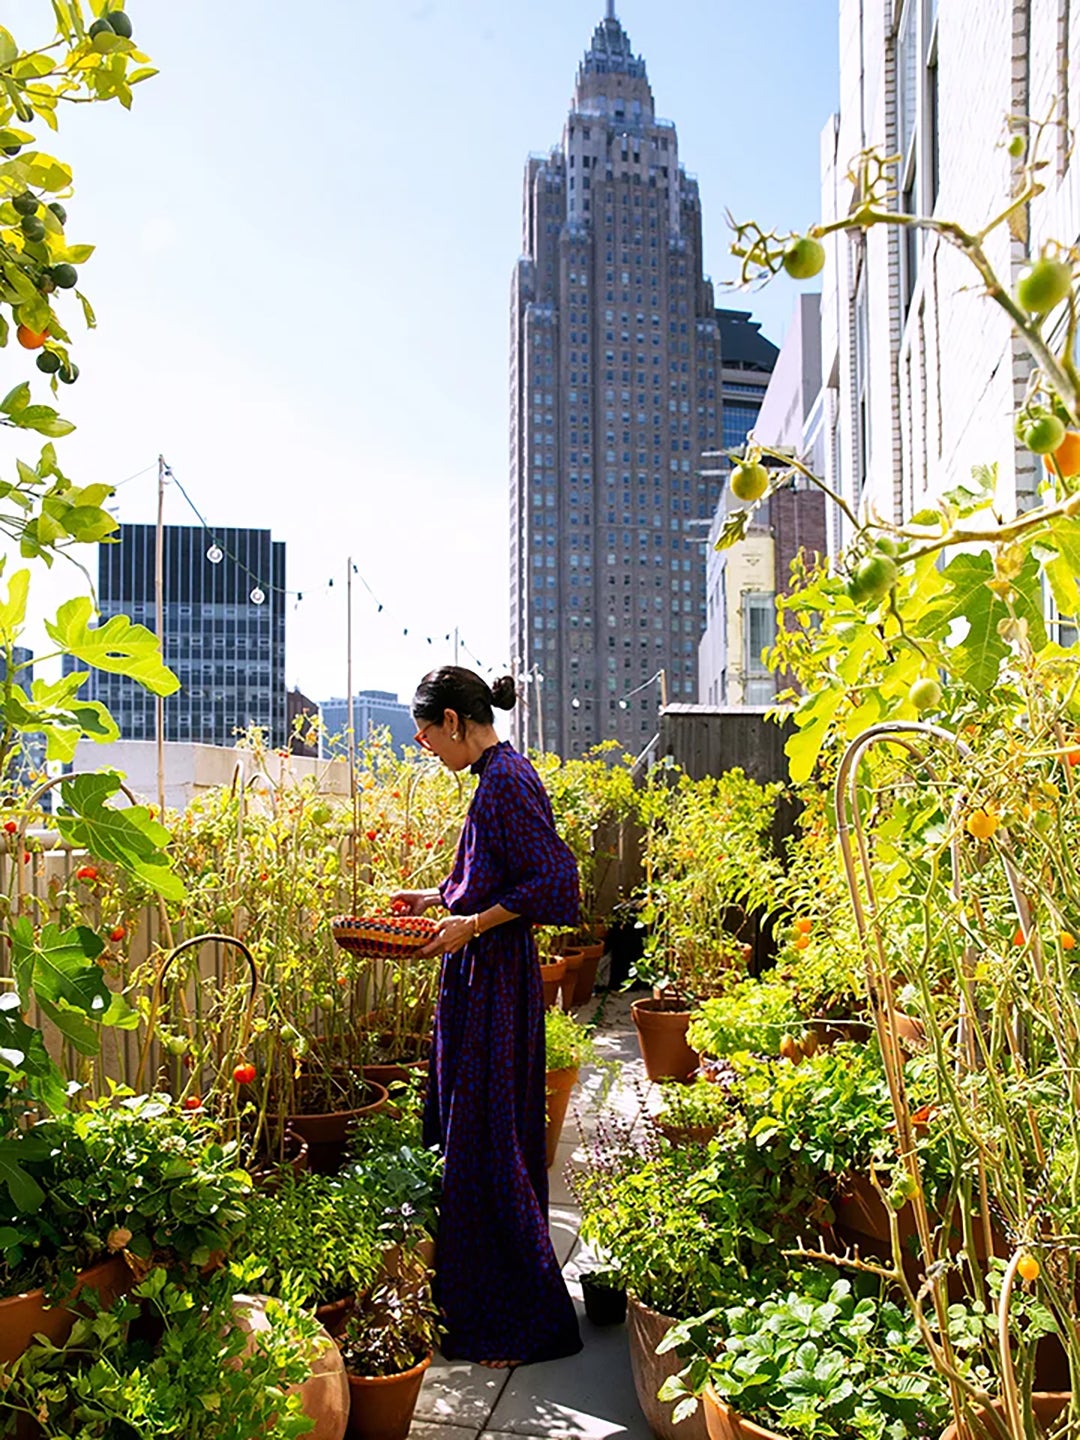 Woman in an outdoor garden on rooftop with skyline in the distance